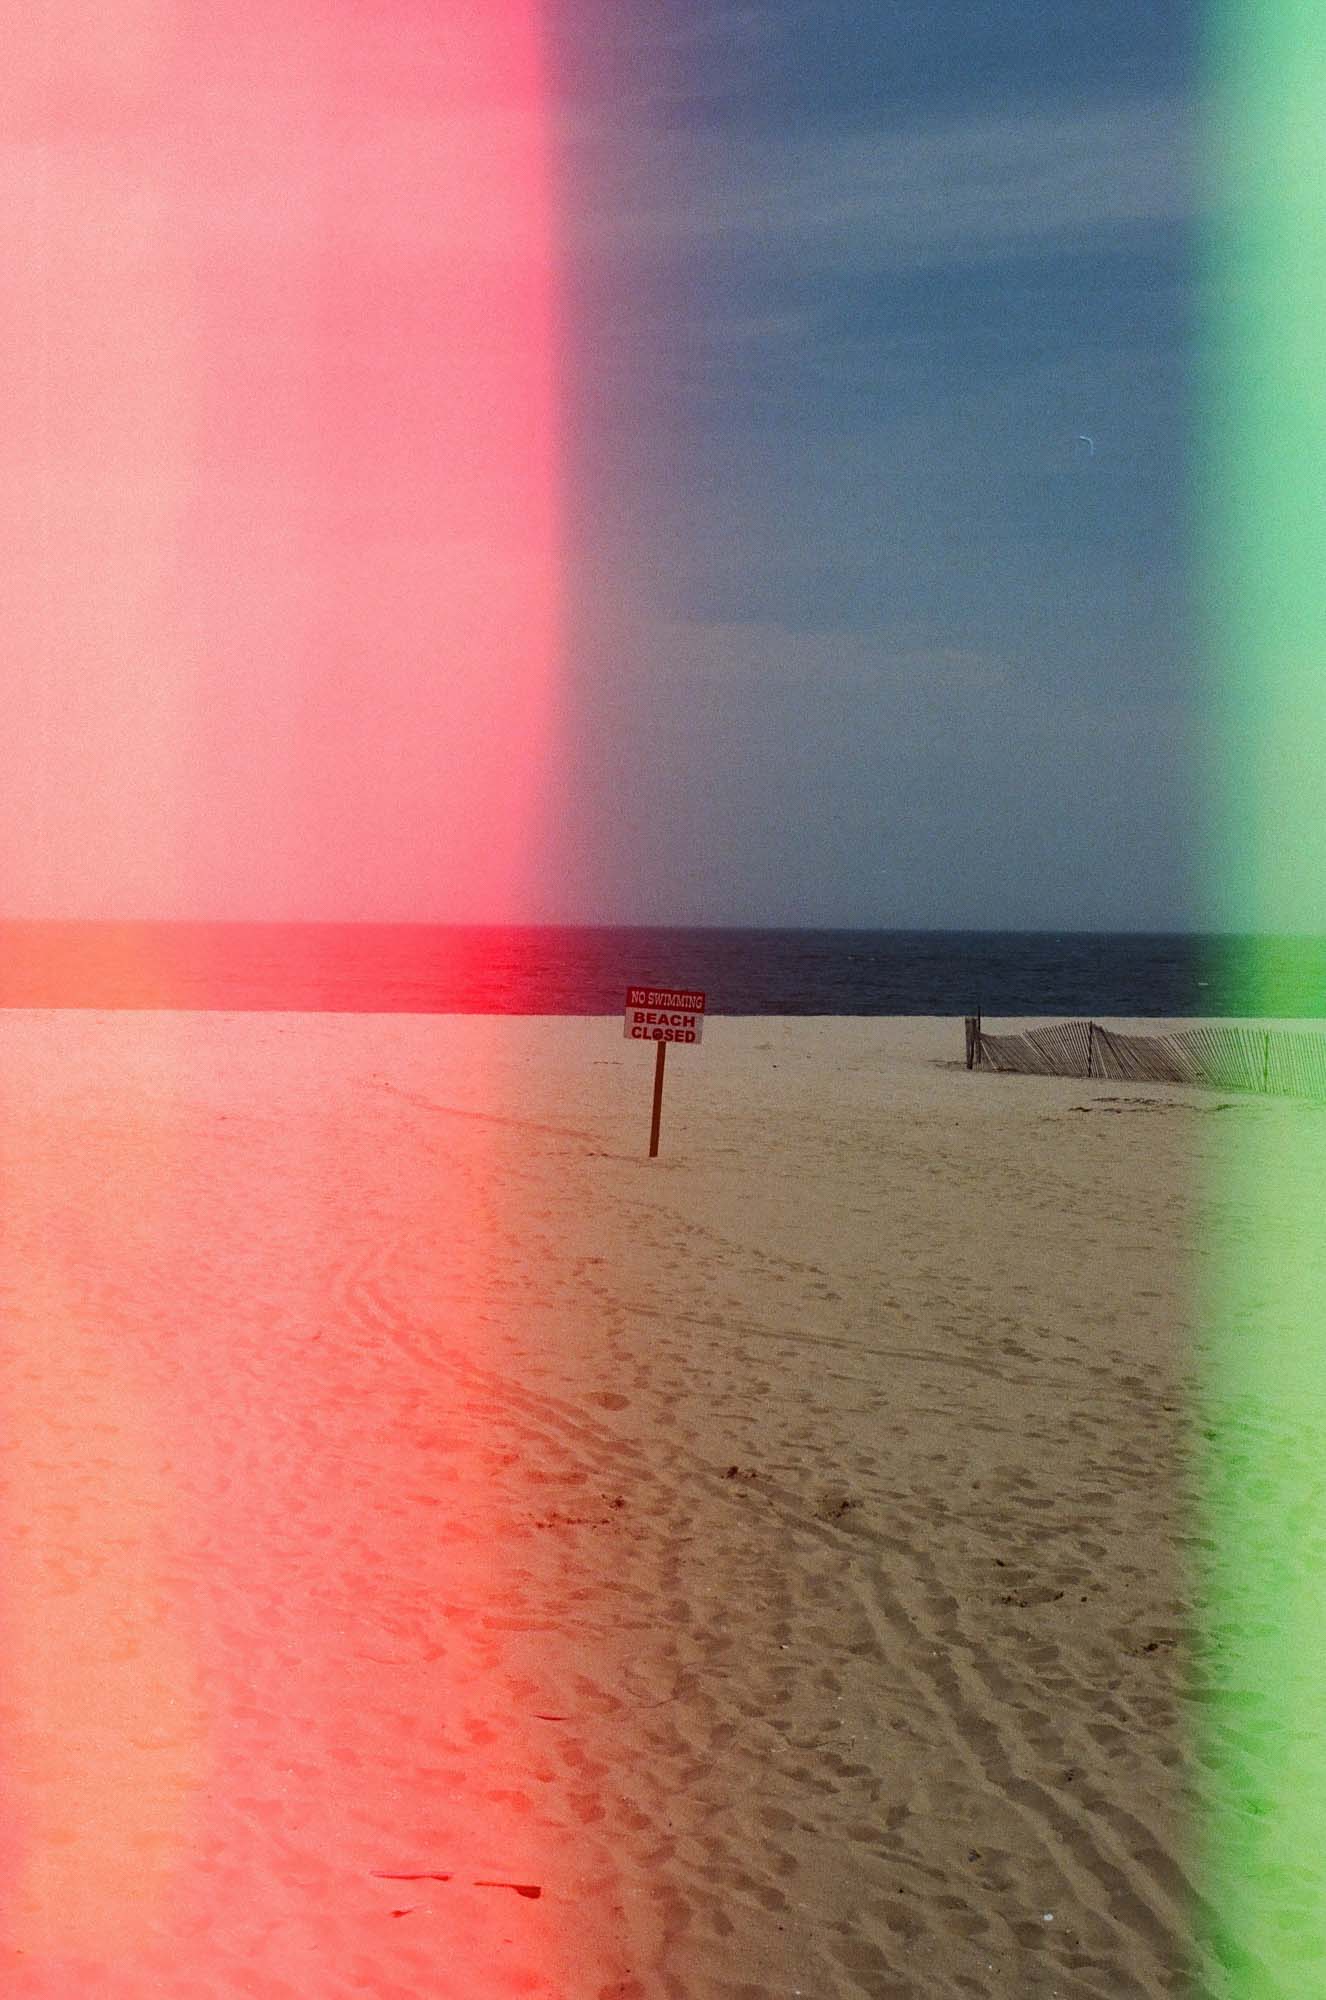 5 Frames With... Psychedelic Blues (EI 400 / 35mm / Nikon N80) - by KristenWithACamera